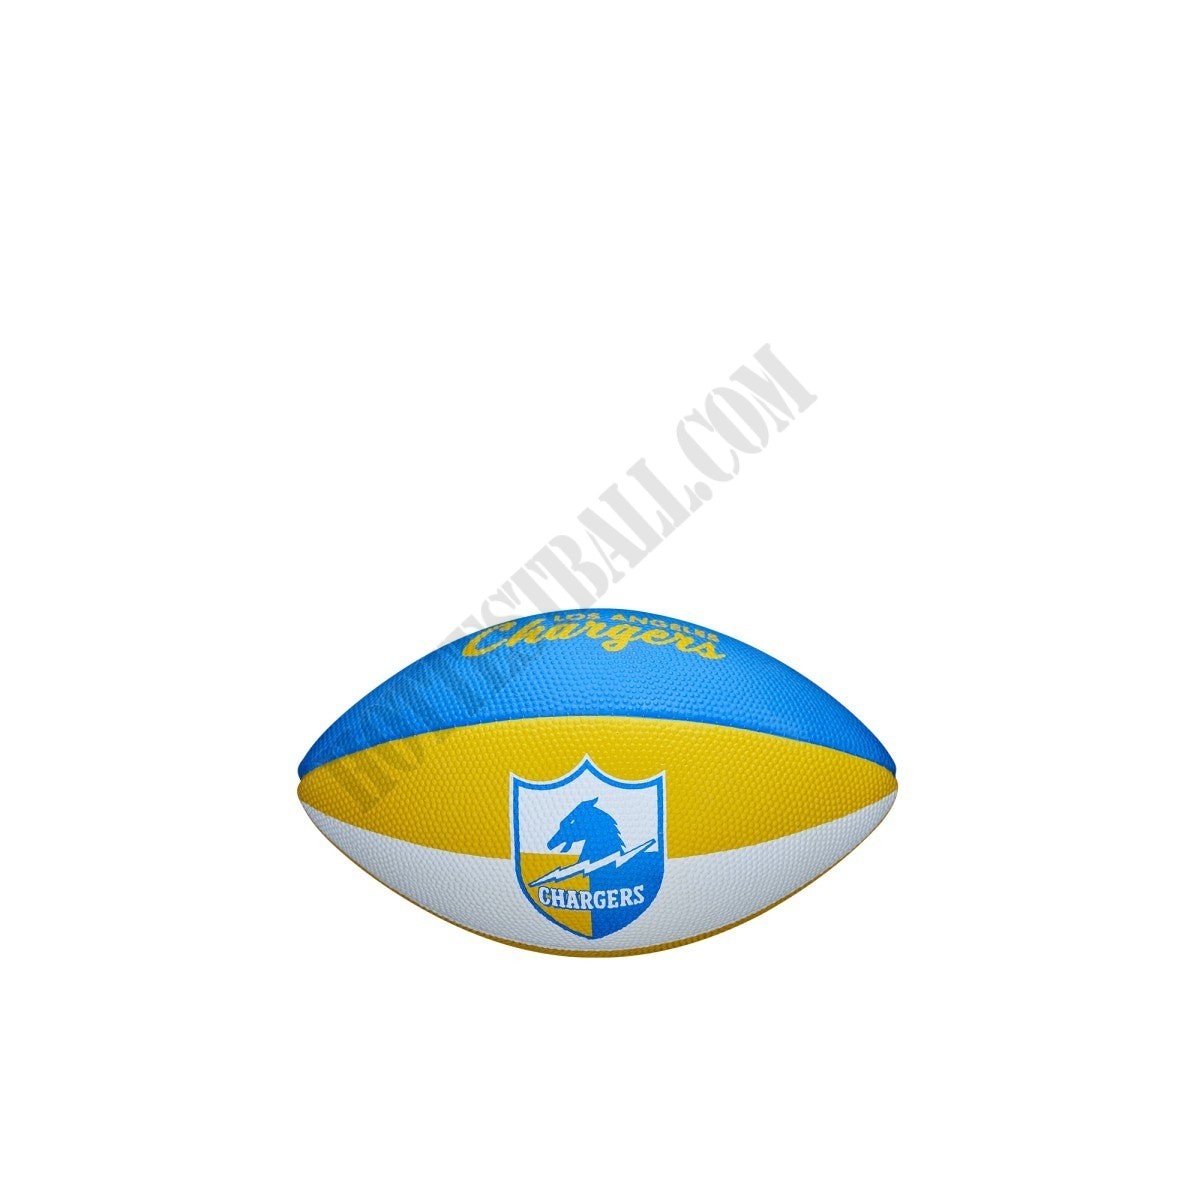 NFL Retro Mini Football - Los Angeles Chargers - Wilson Discount Store - -5